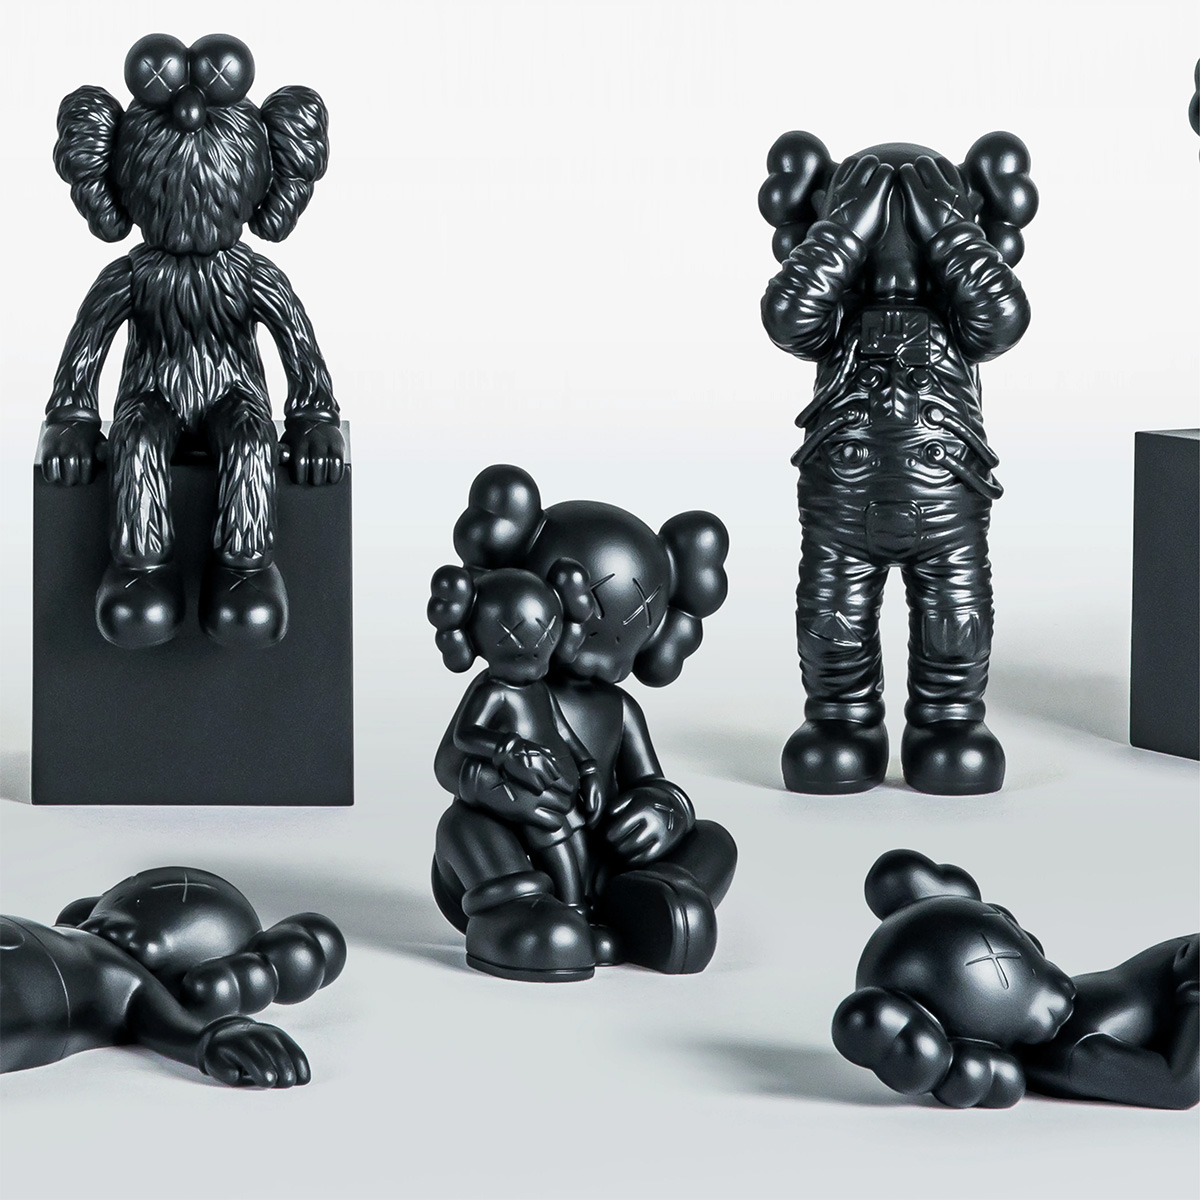 KAWS x AllRightsReserved BRONZE EDITIONS